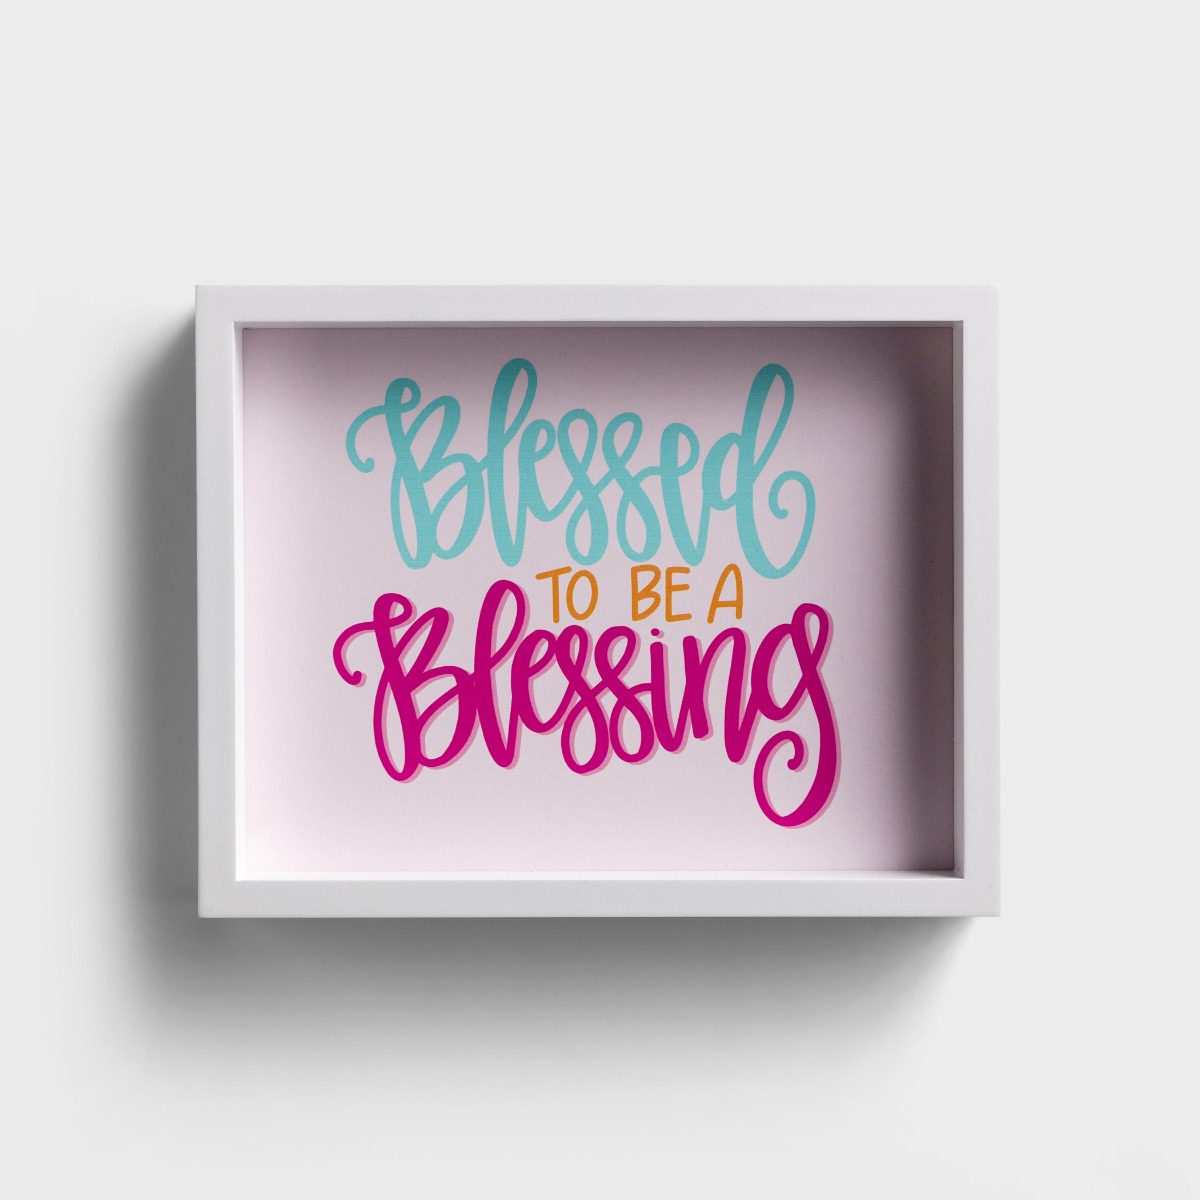 Maghon Taylor - Blessed to be a Blessing - Inspirational Wall Decor